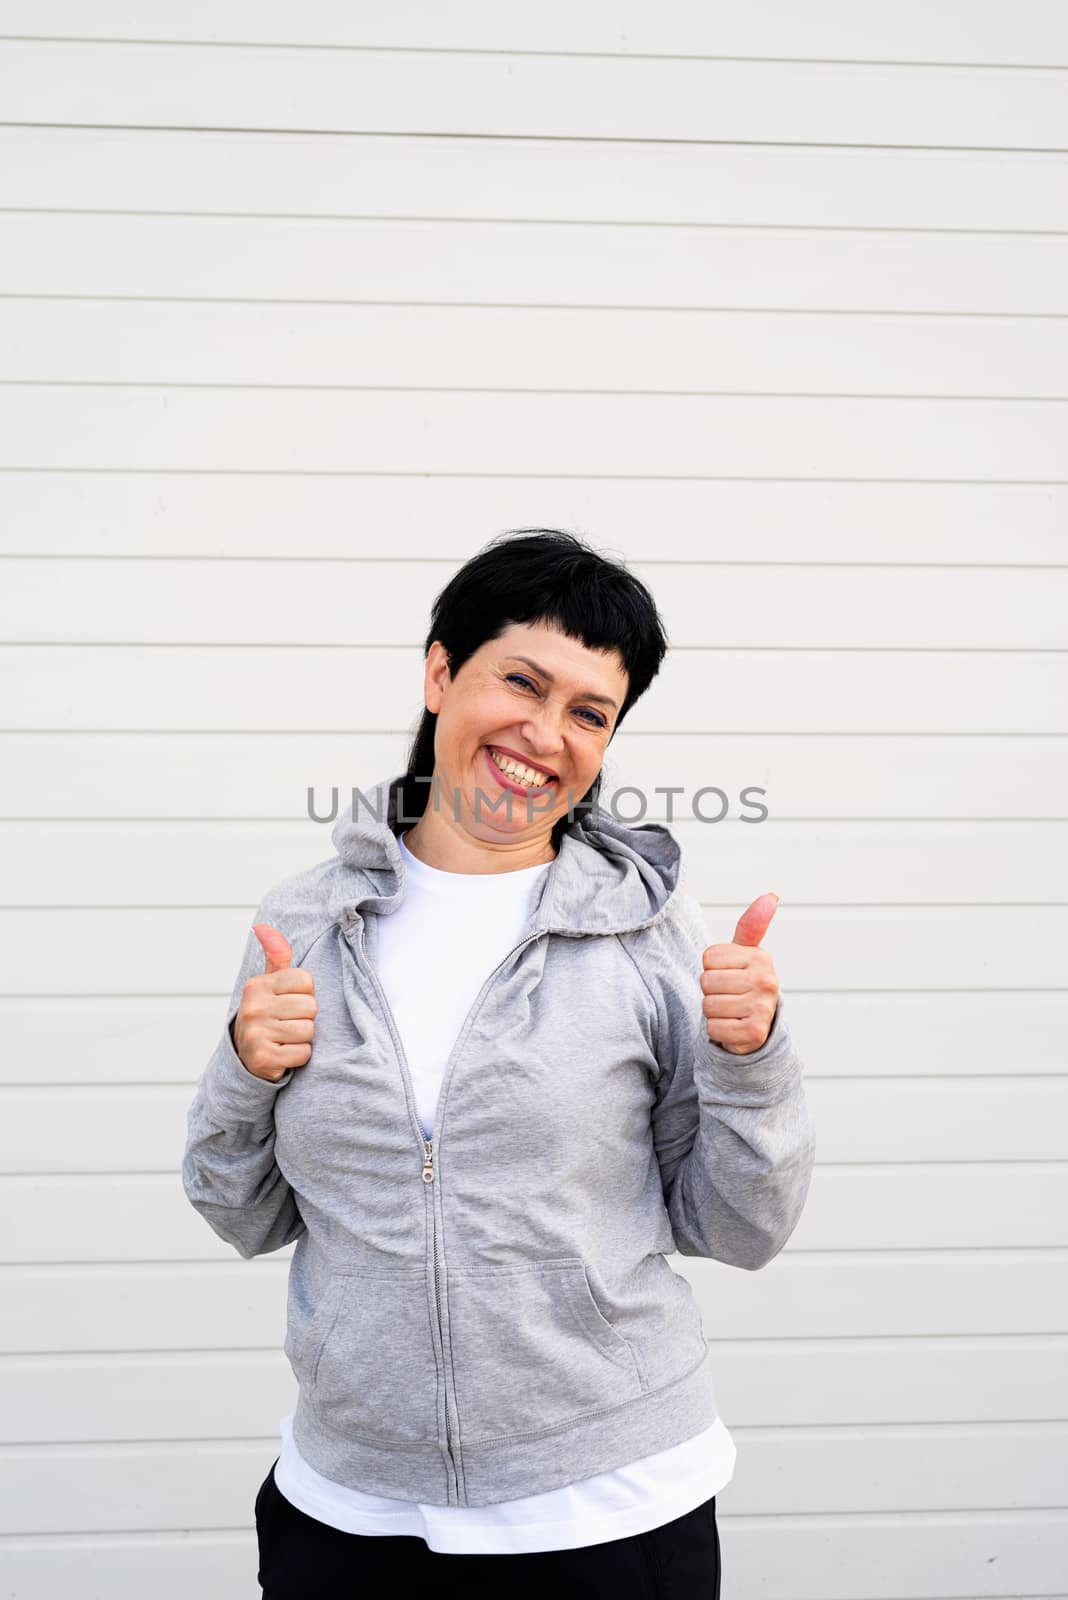 Sport and fitness. Senior sport. Active seniors. Senior woman showing thumbs up standing outdoors on gray solid background